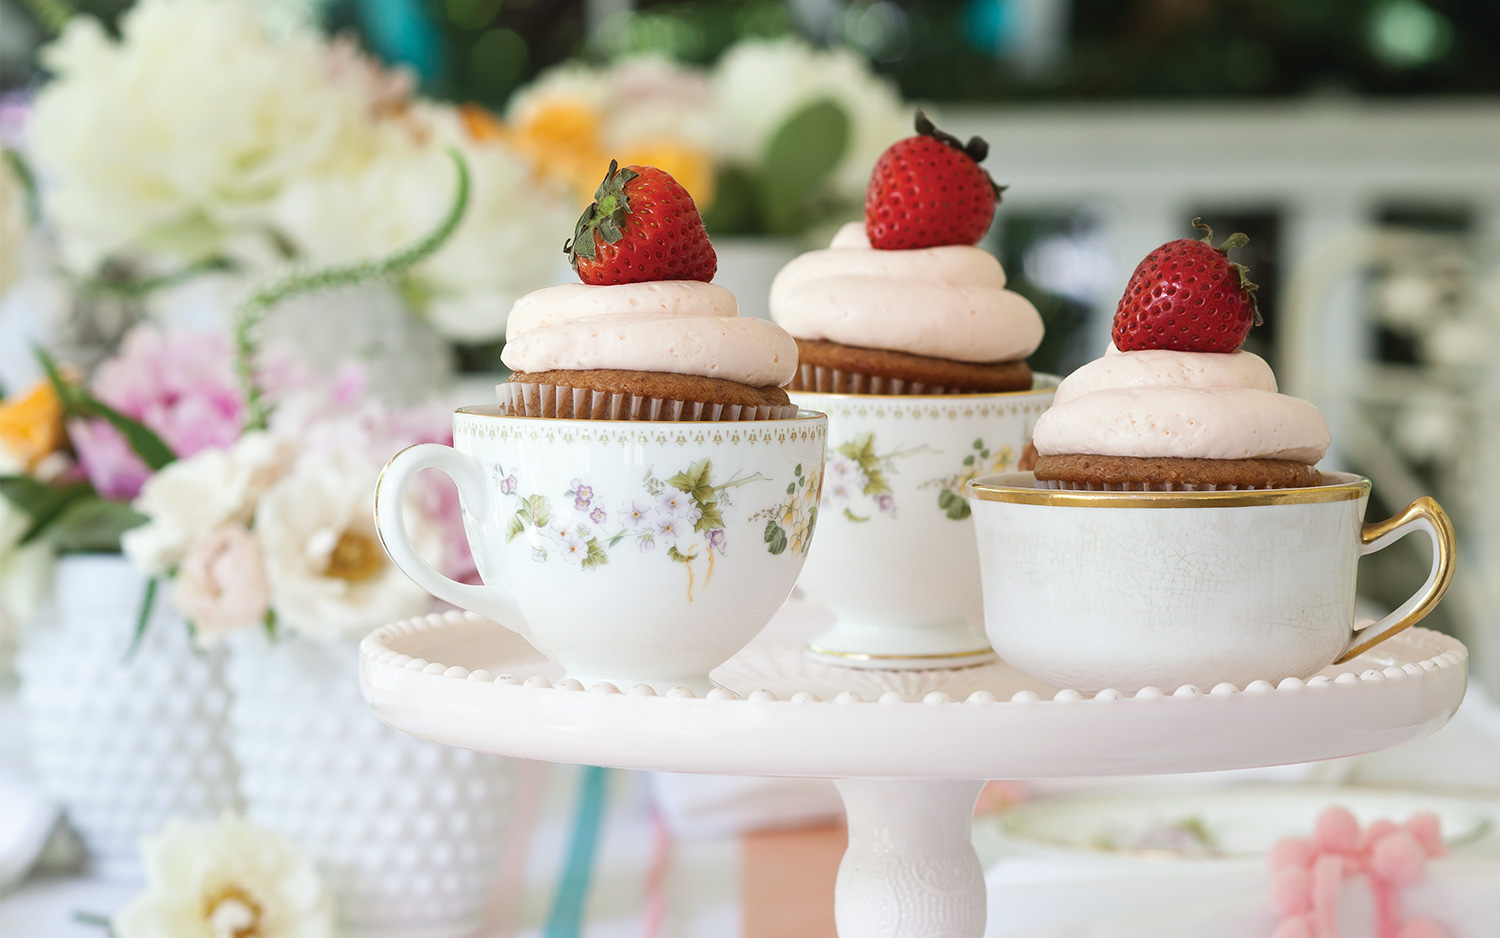 Three strawberry cupcakes in mismatched teacups on a cake stand